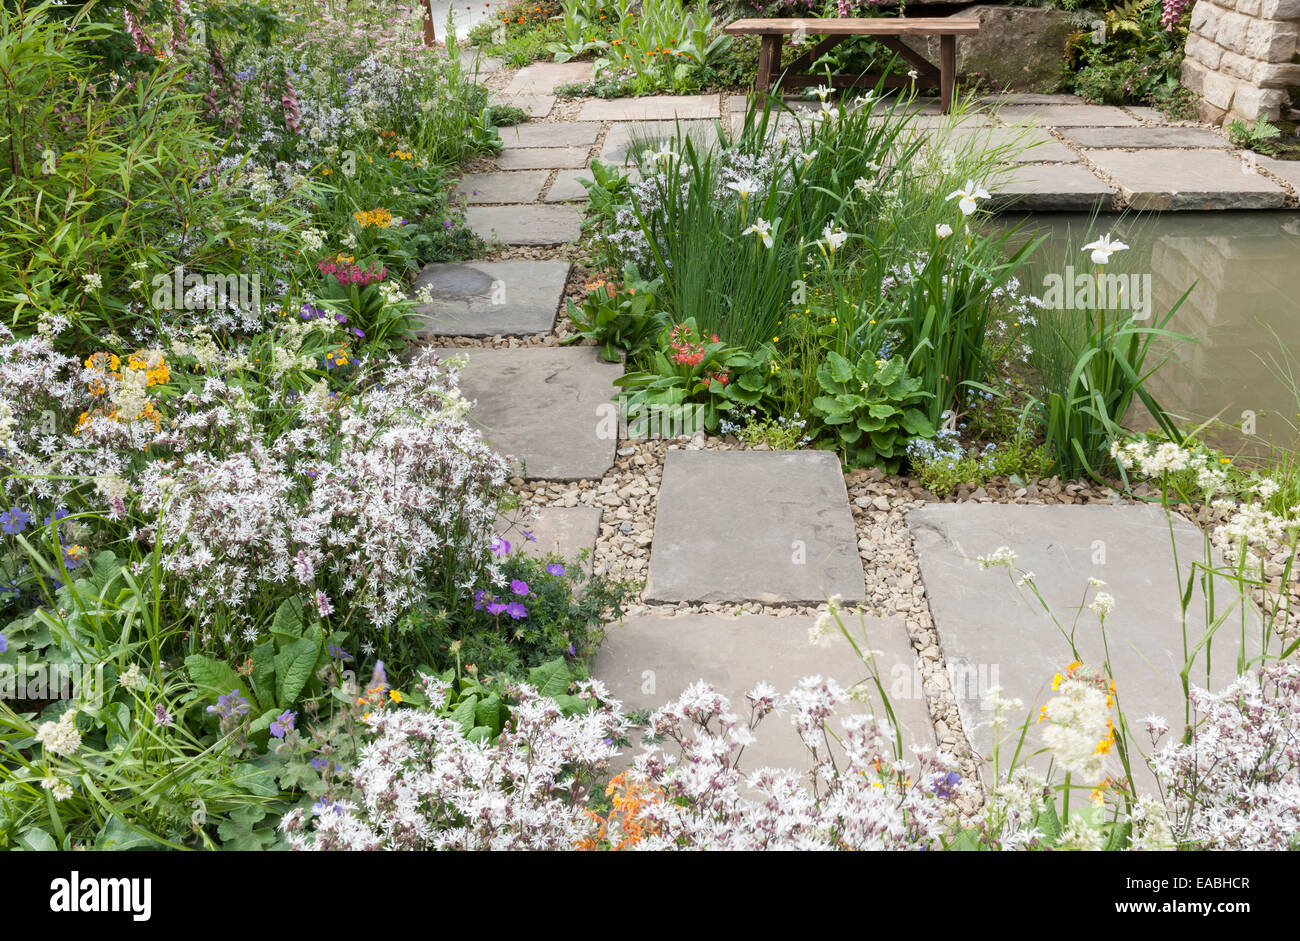 paved small garden by pond photographed at rhs chelsea flower show Stock Photo